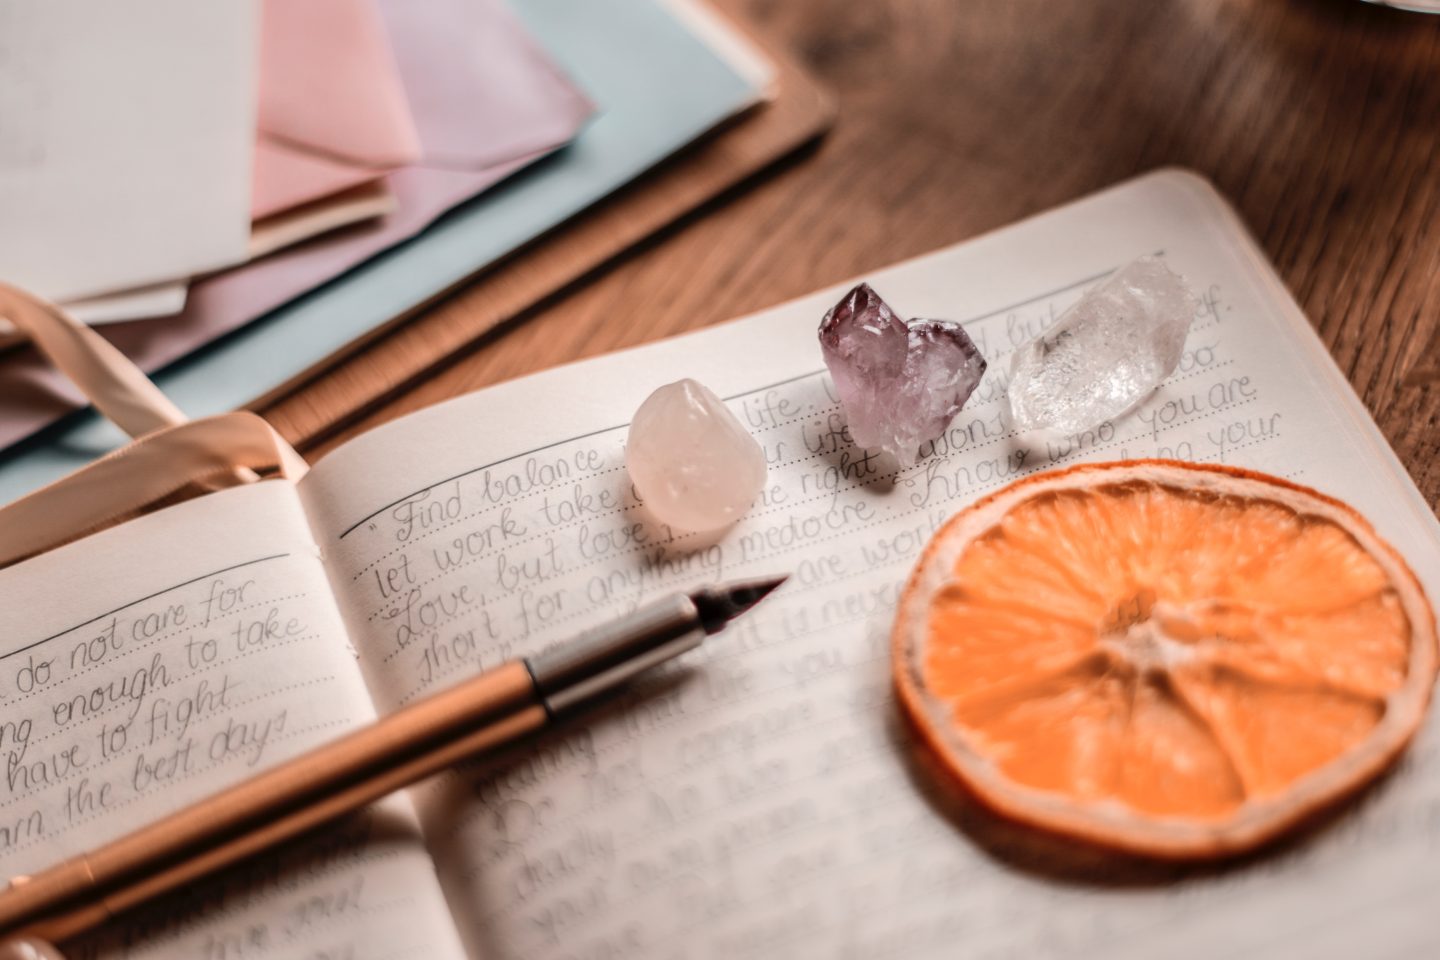 Open Your Mind in 2020 with 10 of the Best Spiritual and Natural Self-Care Subscription Boxes